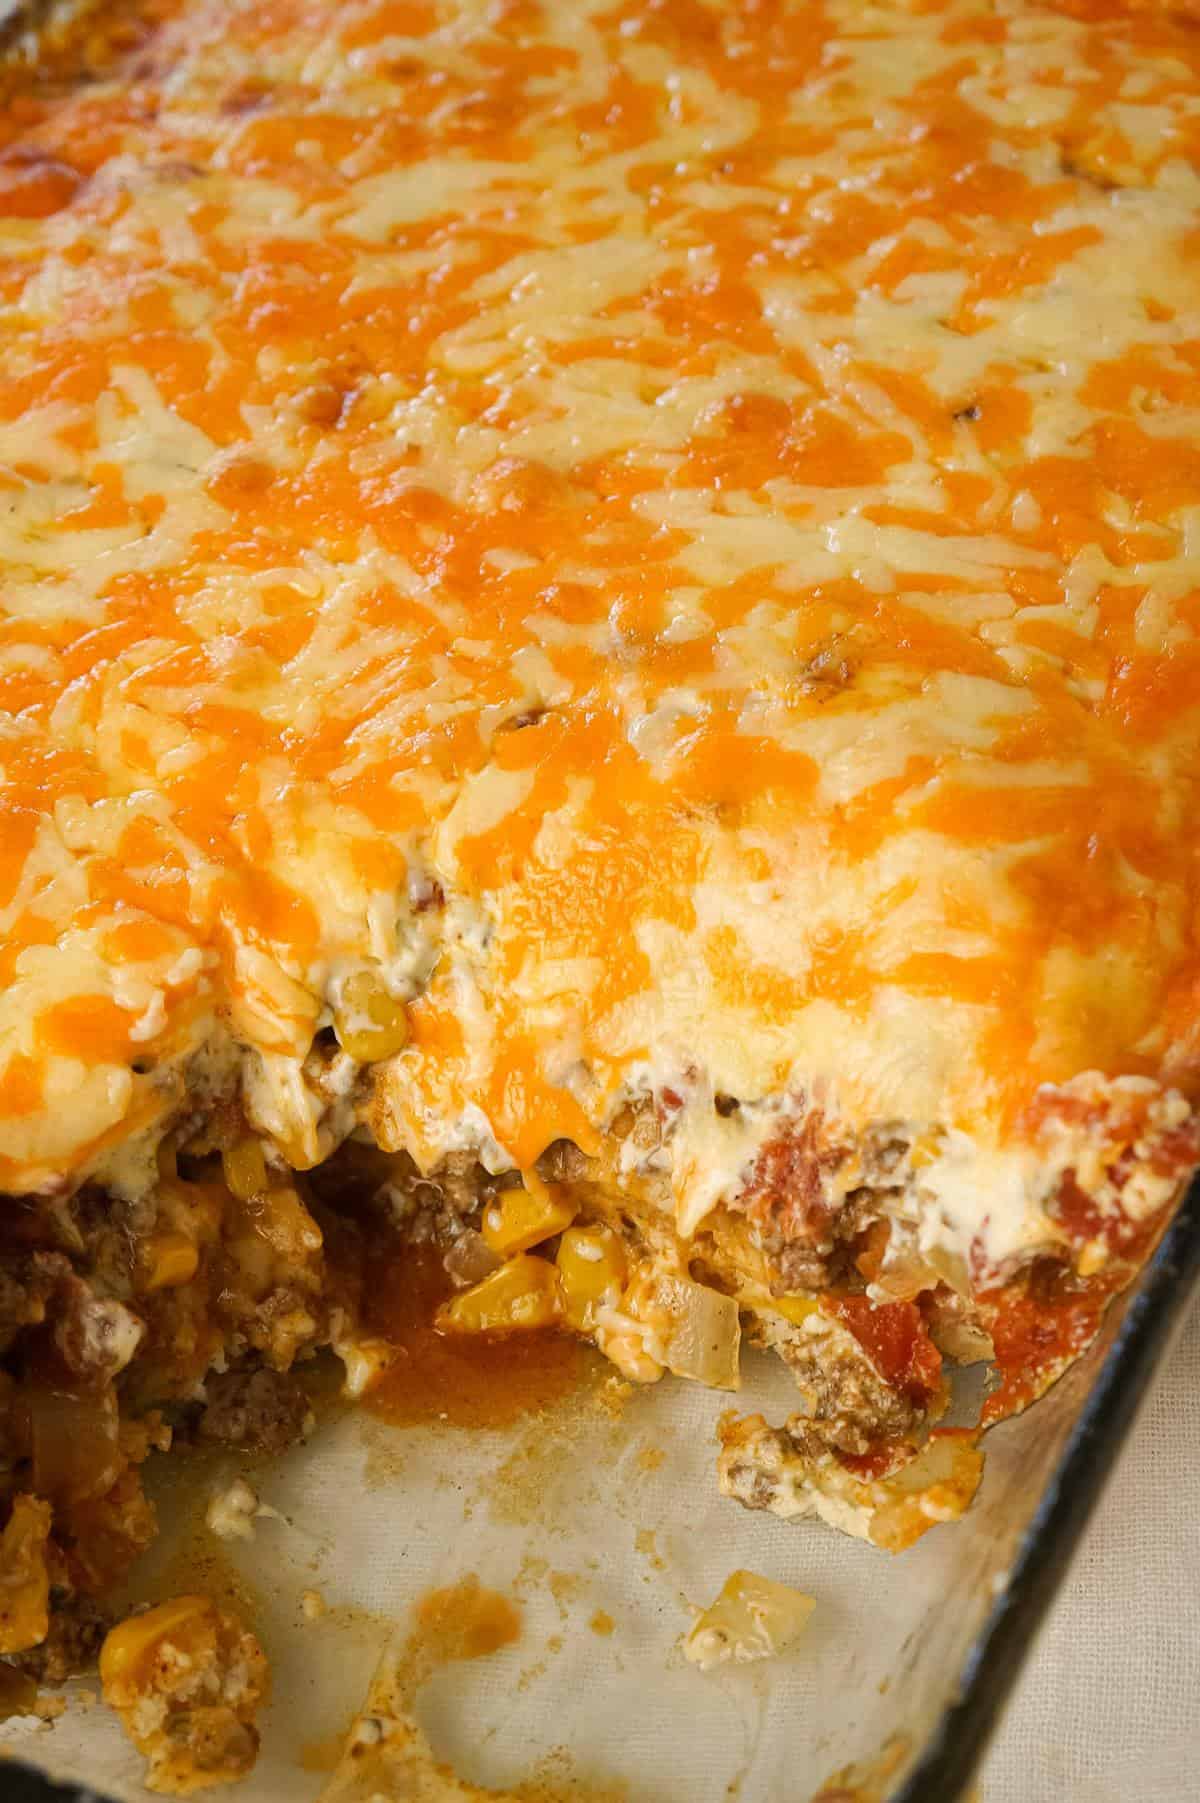 John Wayne Casserole is an easy ground beef casserole recipe with a biscuit base and loaded with diced tomatoes, corn, taco seasoning, cream cheese, mozzarella and cheddar.